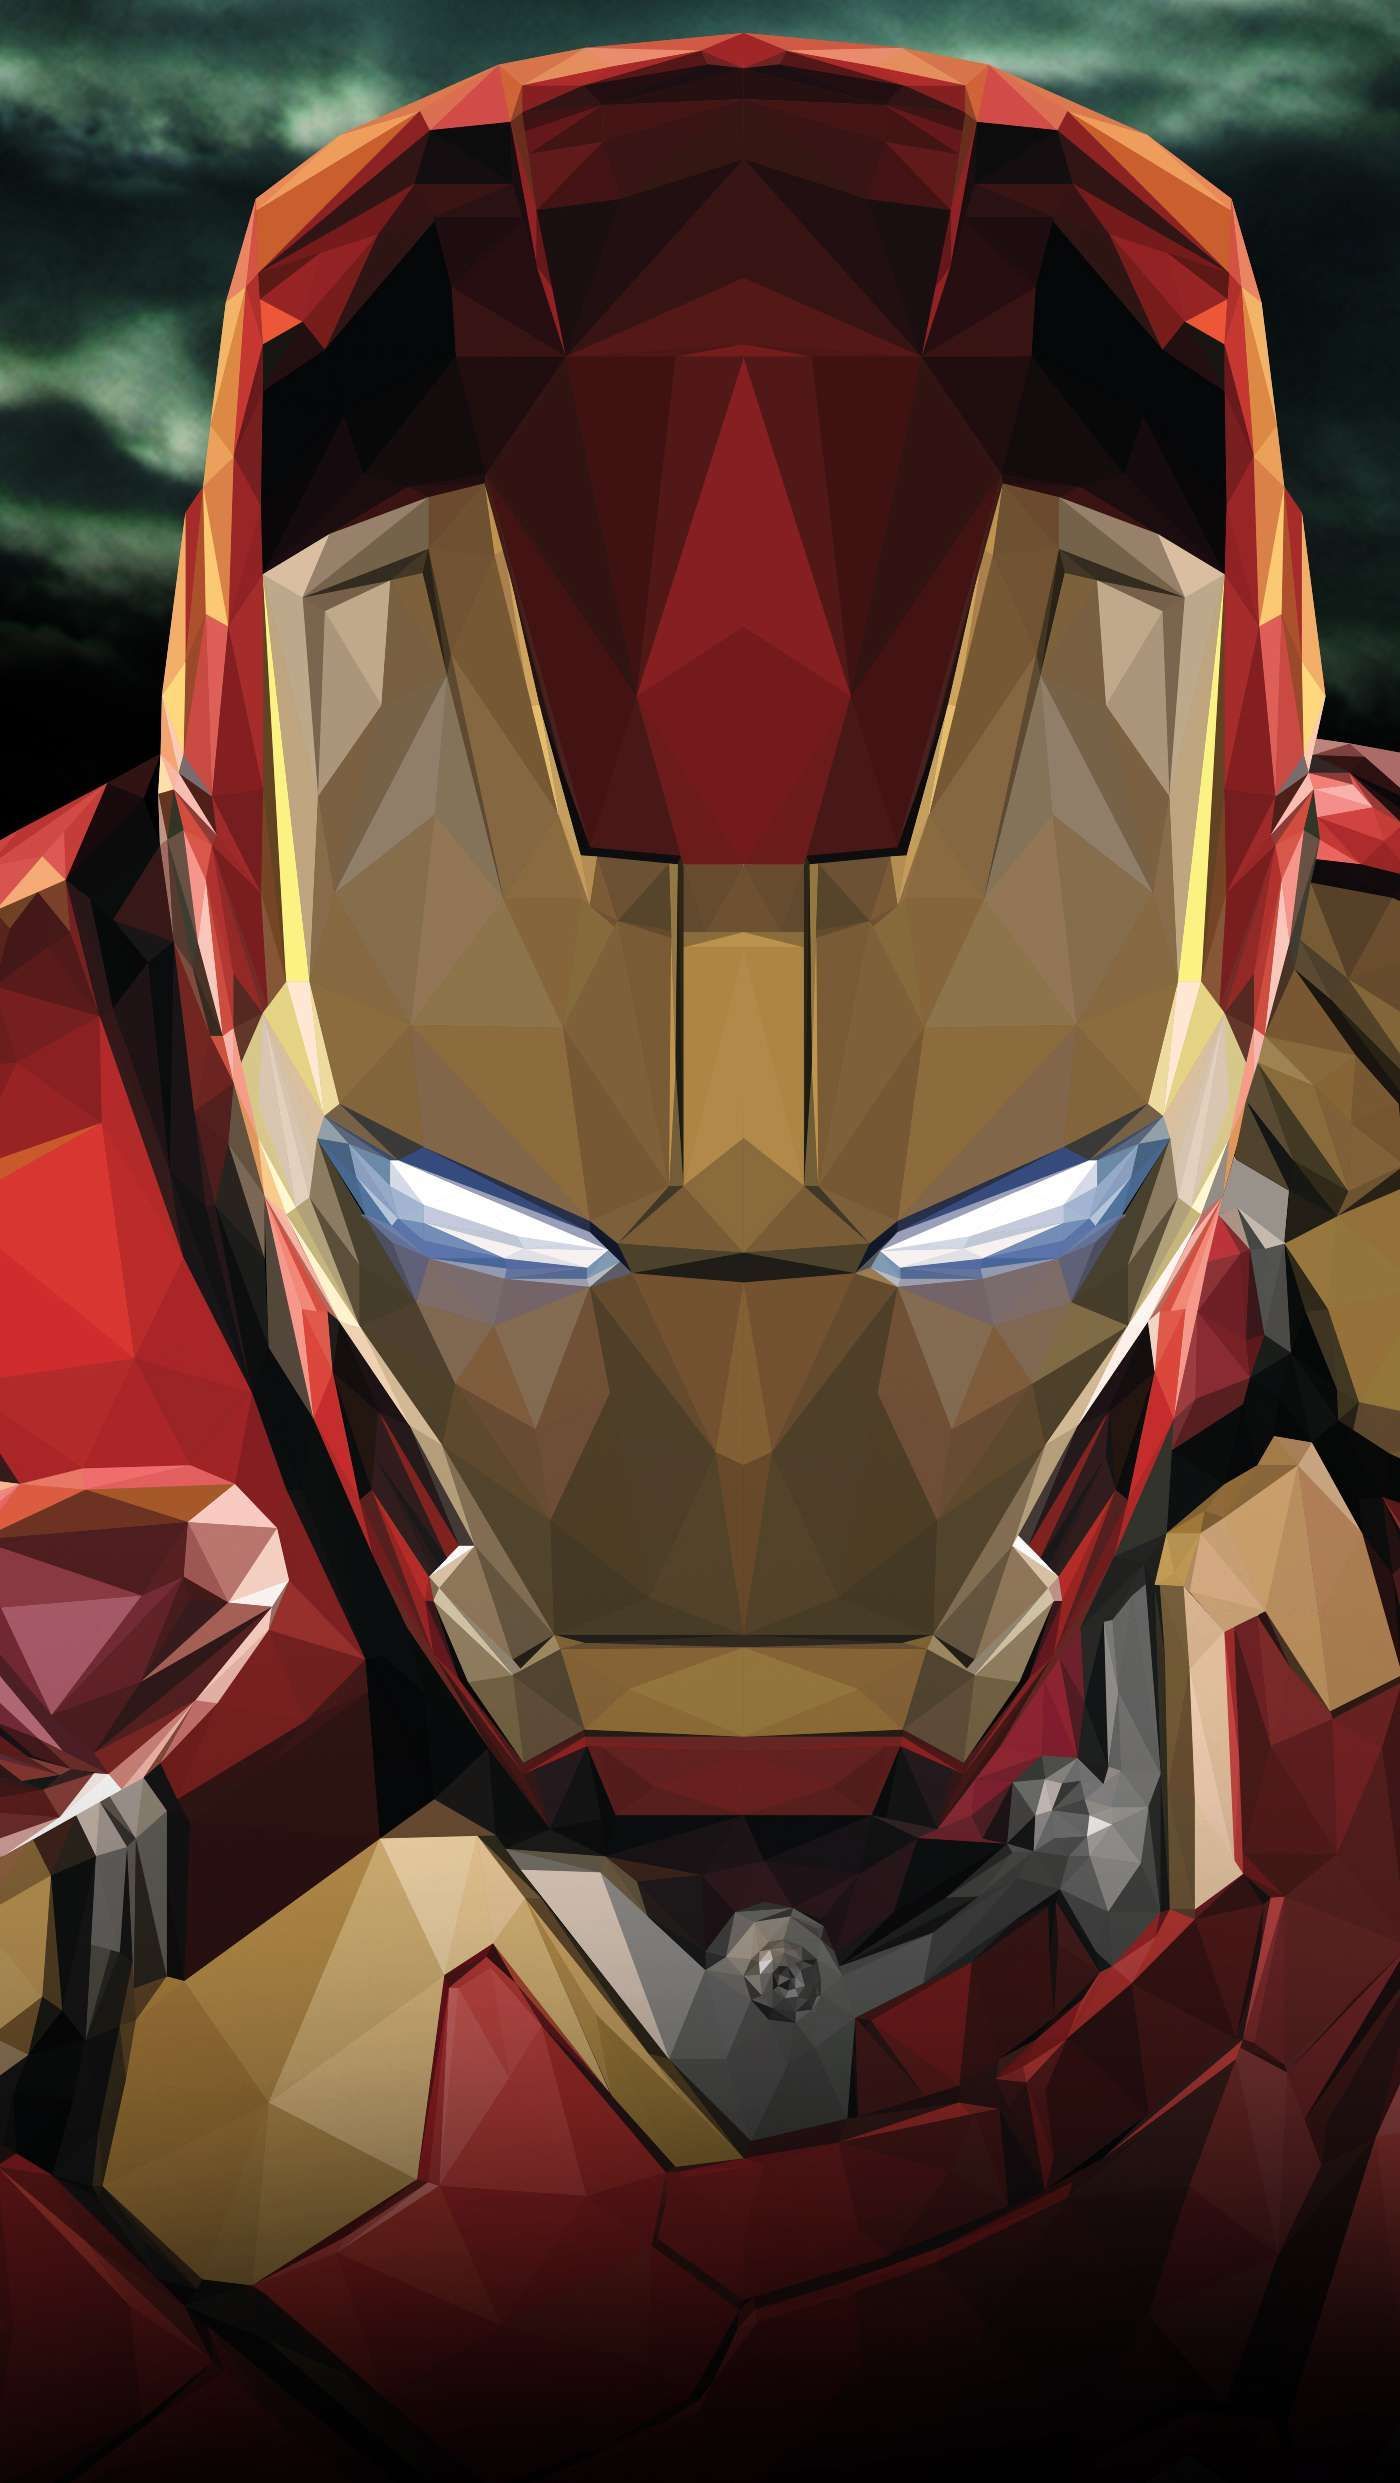 Iron Man Polygon Art iPhone Wallpaper Love Marvel? Check out our Sortable Avengers Fanfiction Rec Lis. Marvel comics wallpaper, Iron man art, Iron man wallpaper